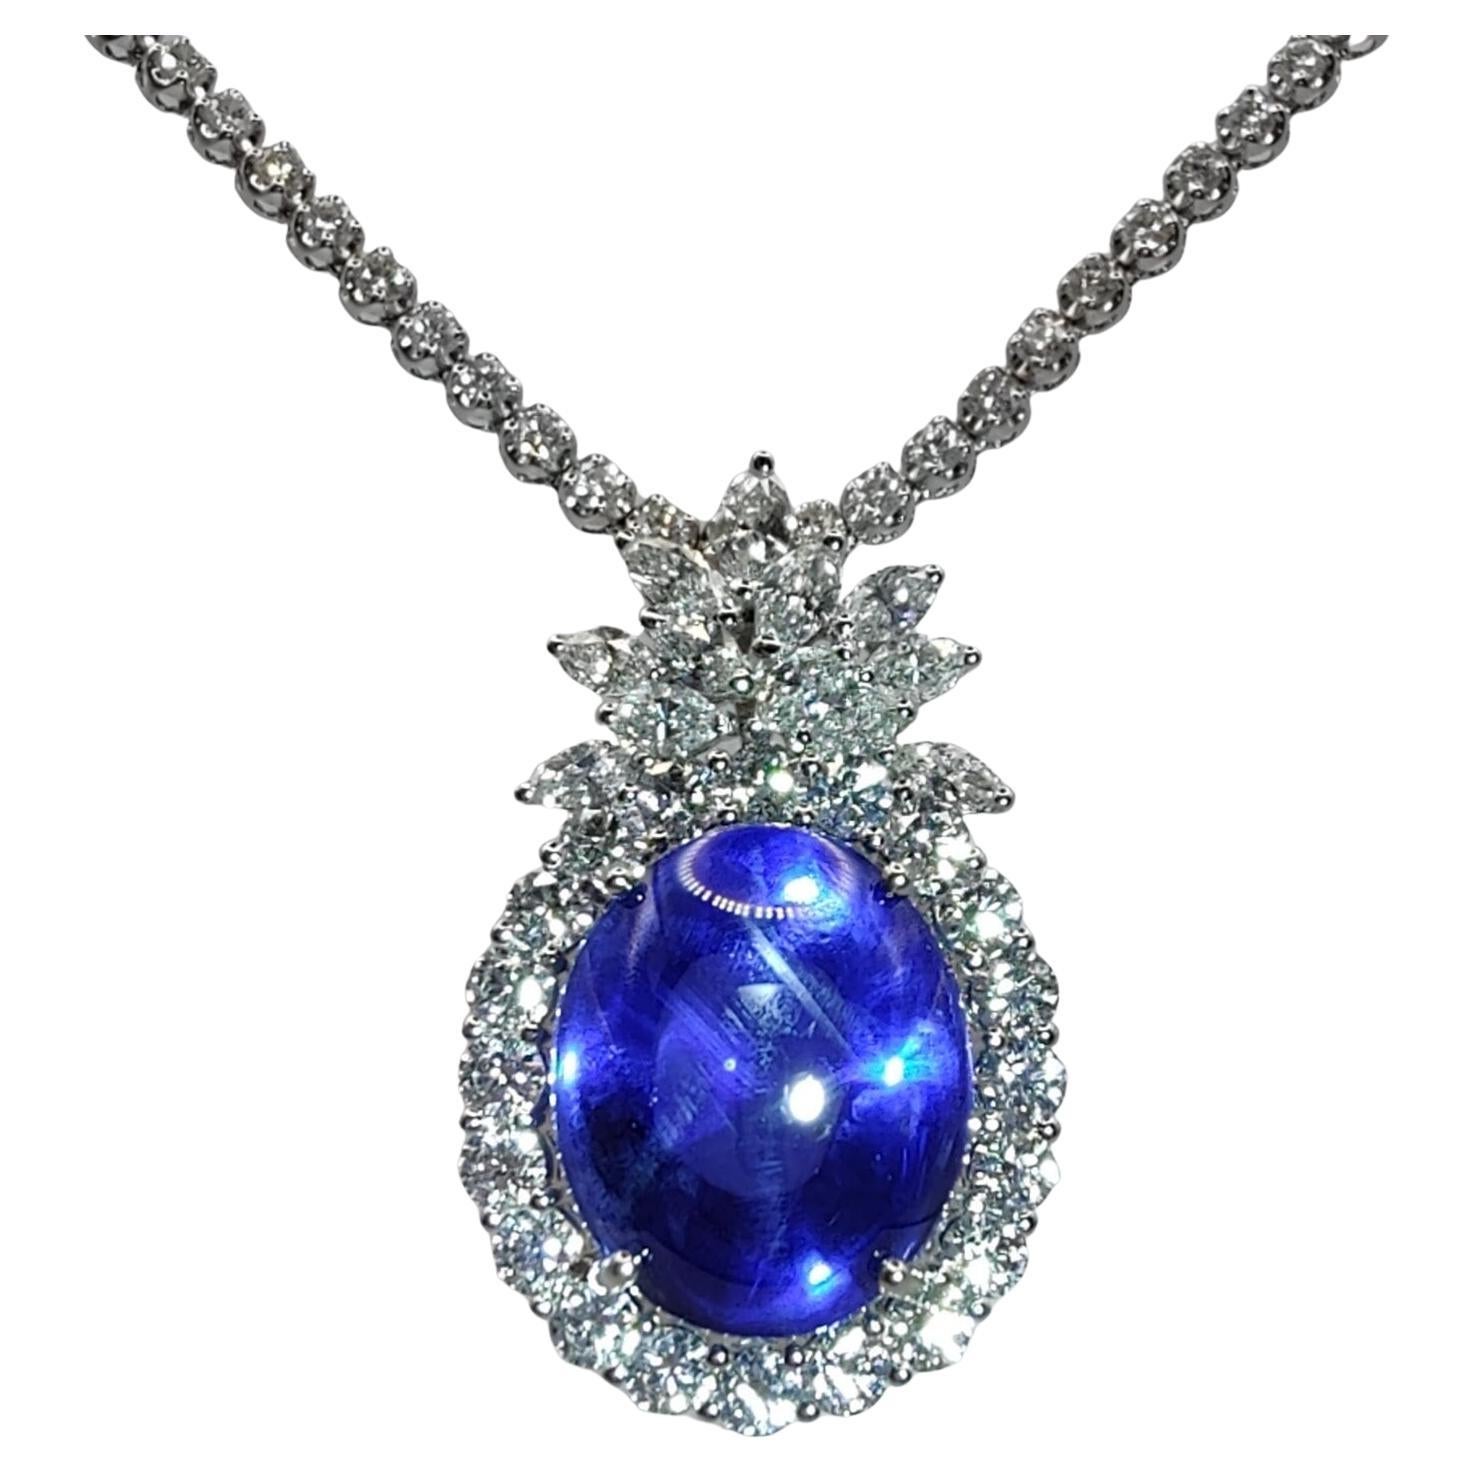 Gublin Certified 26.88ct Unheated Blue Star Sapphire & 7.41ct Diamond Necklace For Sale